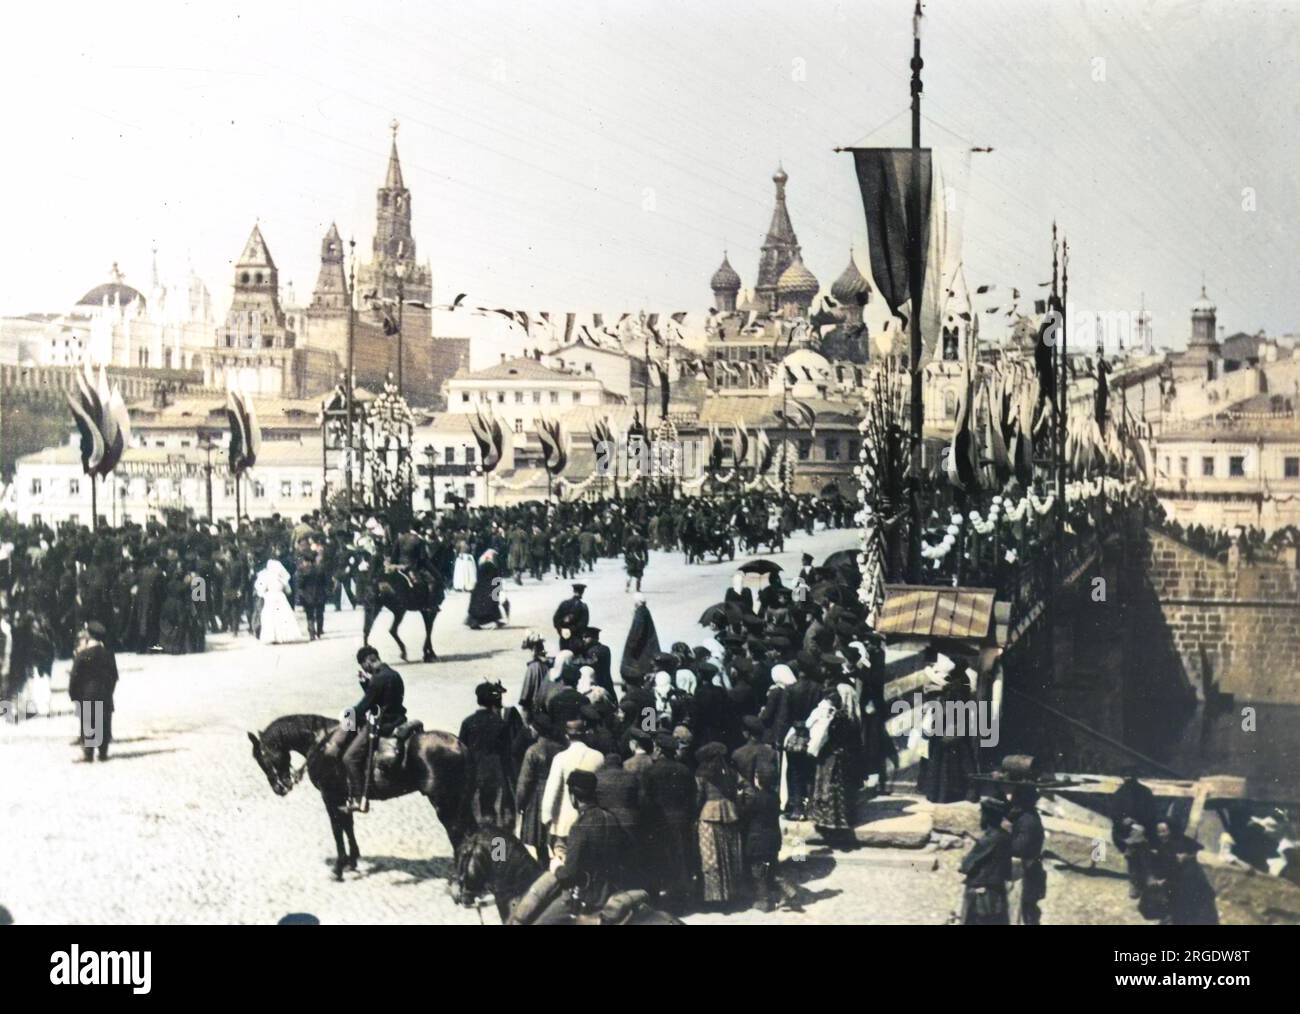 Tsar Nicholas II of Russia was crowned on the 26th of May 1896, this parade on the Kamenny Bridge in Moscow, is a small glimpse of the celebratory mood said to have captivated the Russian people. Stock Photo